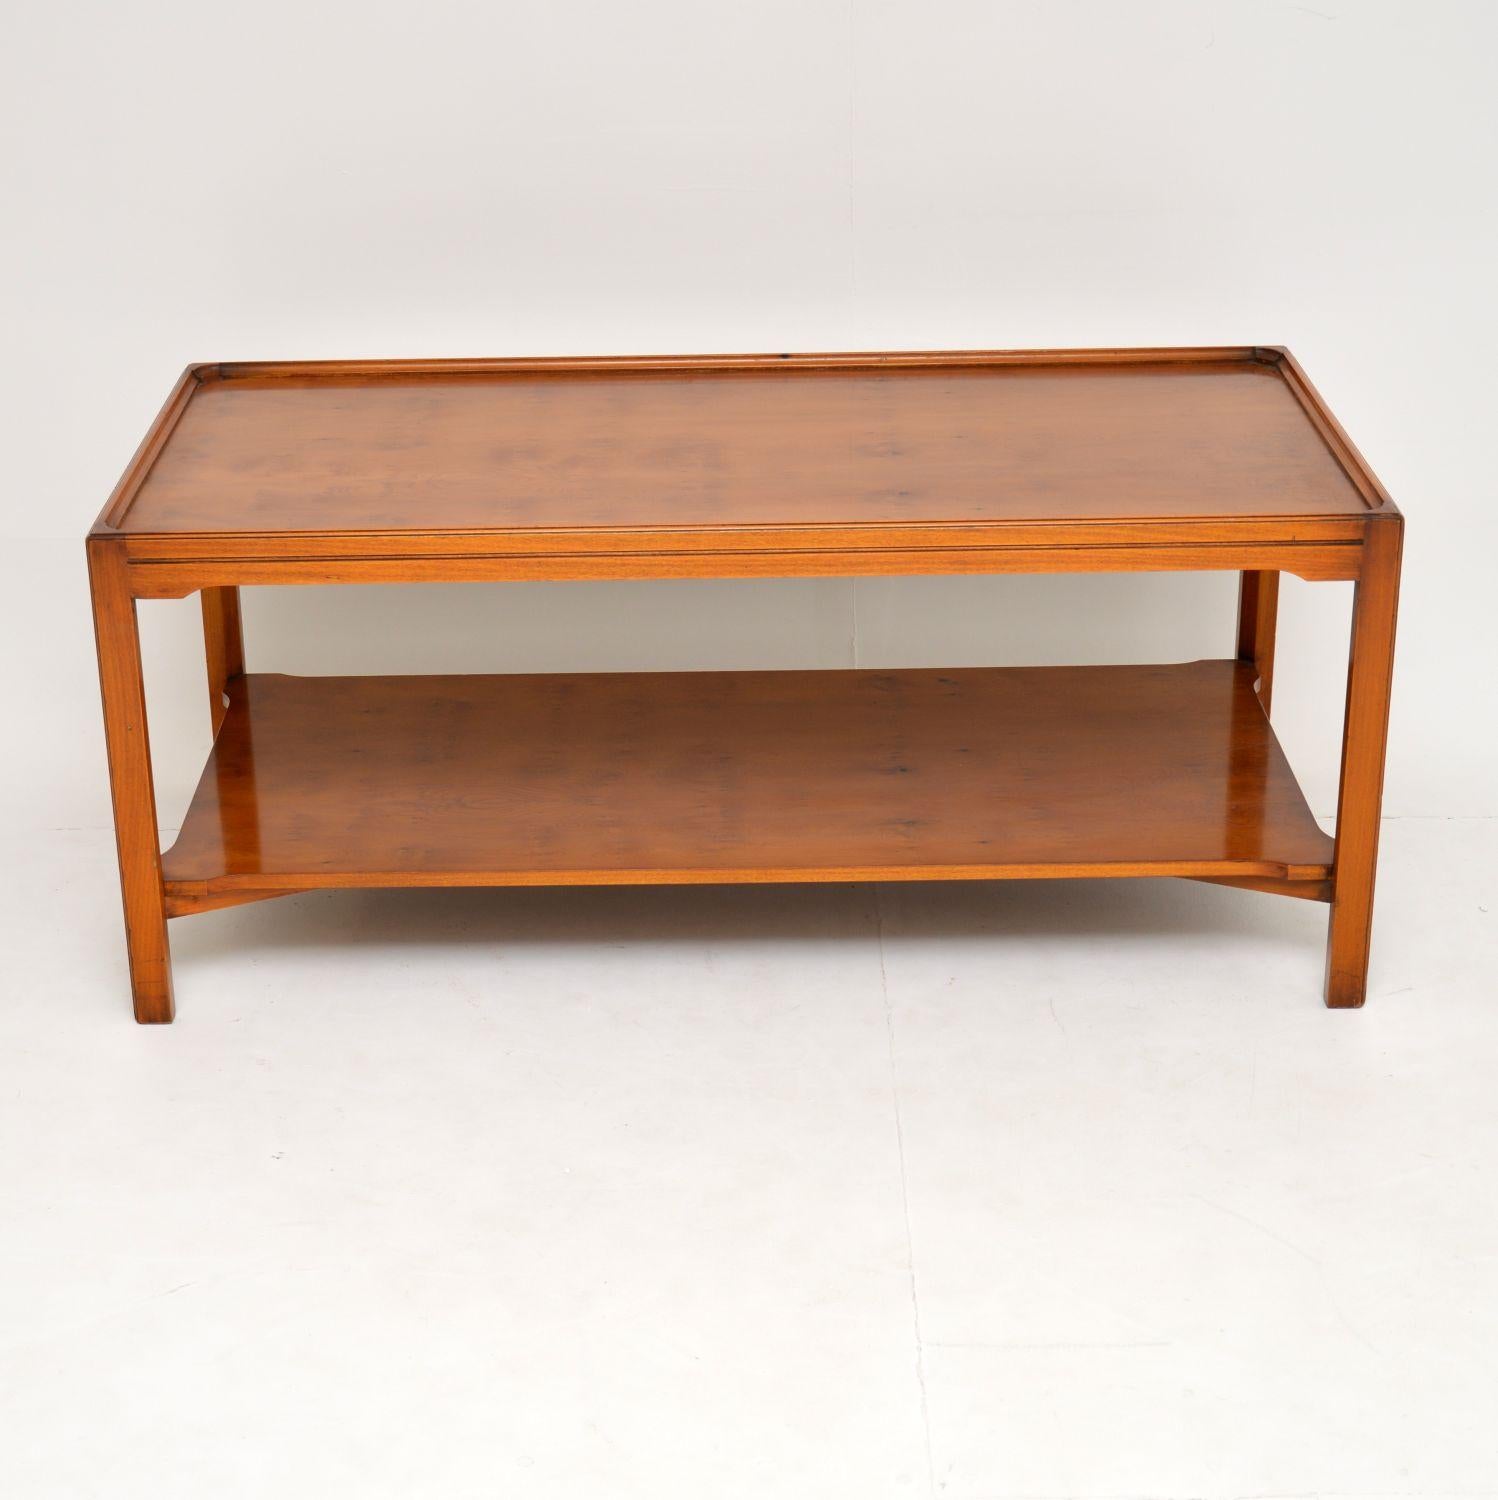 Large antique Georgian style yew wood coffee table dating from circa 1950s period and in excellent condition.

It’s a very practical table, having that bottom section for extra storage & it has a lovely mellow colour. It’s also of very solid